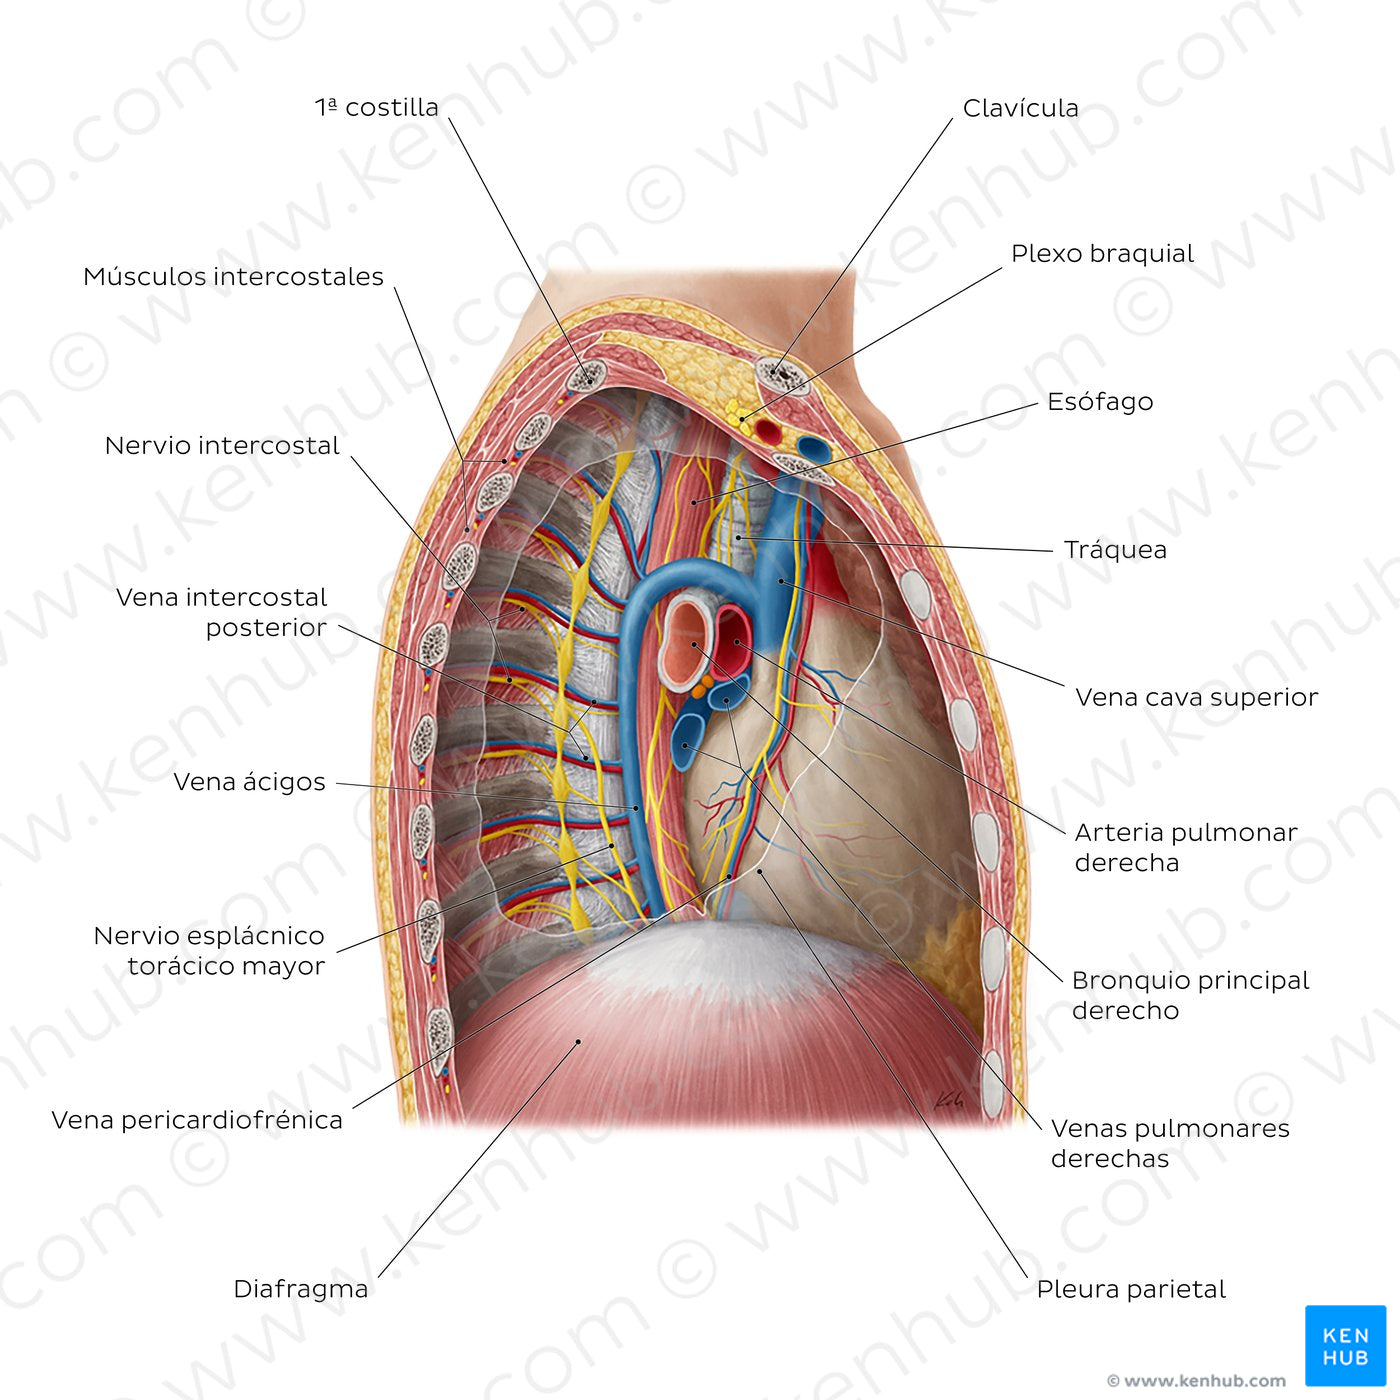 Contents of the mediastinum: Right lateral view (Spanish)